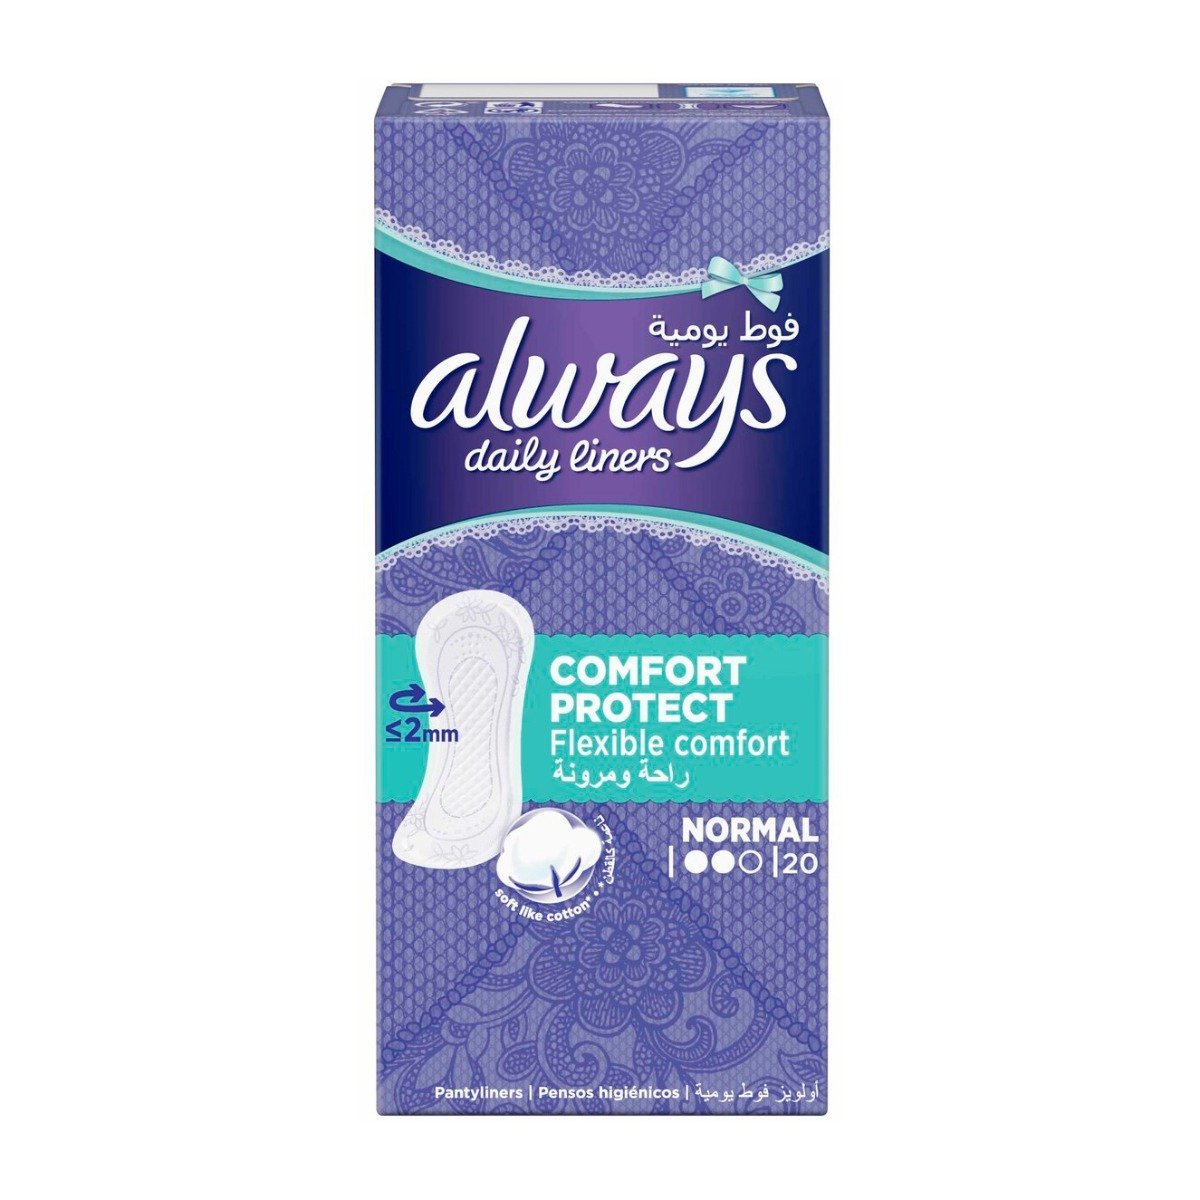 Always Daily Liners Comfort Protect Normal - 20pcs - Bloom Pharmacy